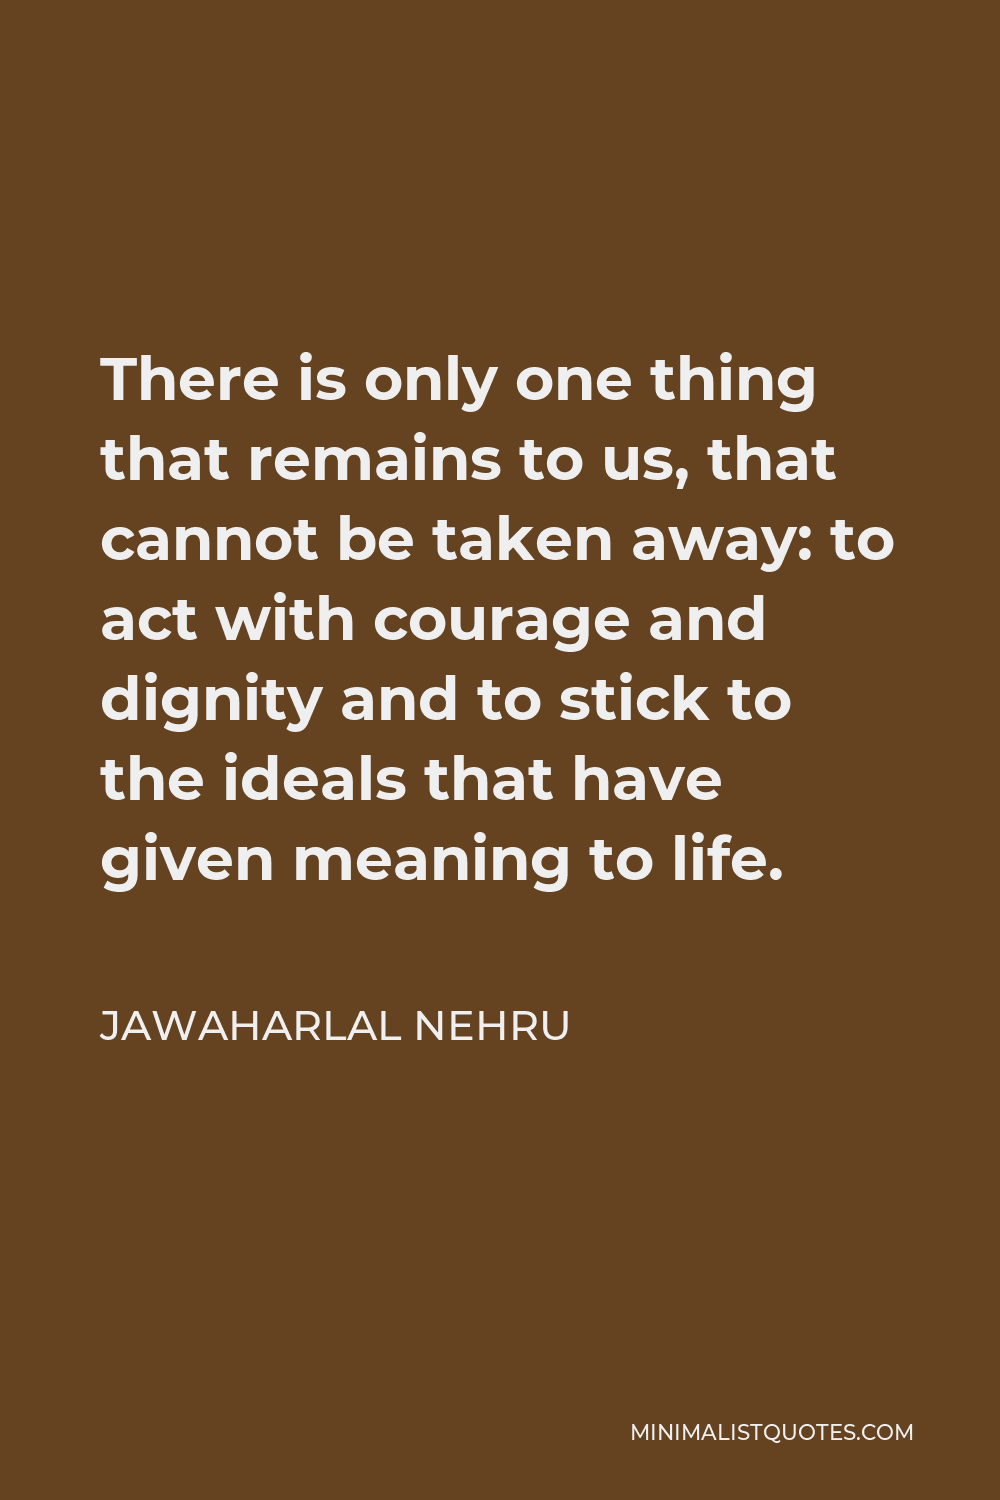 Jawaharlal Nehru Quote - There is only one thing that remains to us, that cannot be taken away: to act with courage and dignity and to stick to the ideals that have given meaning to life.